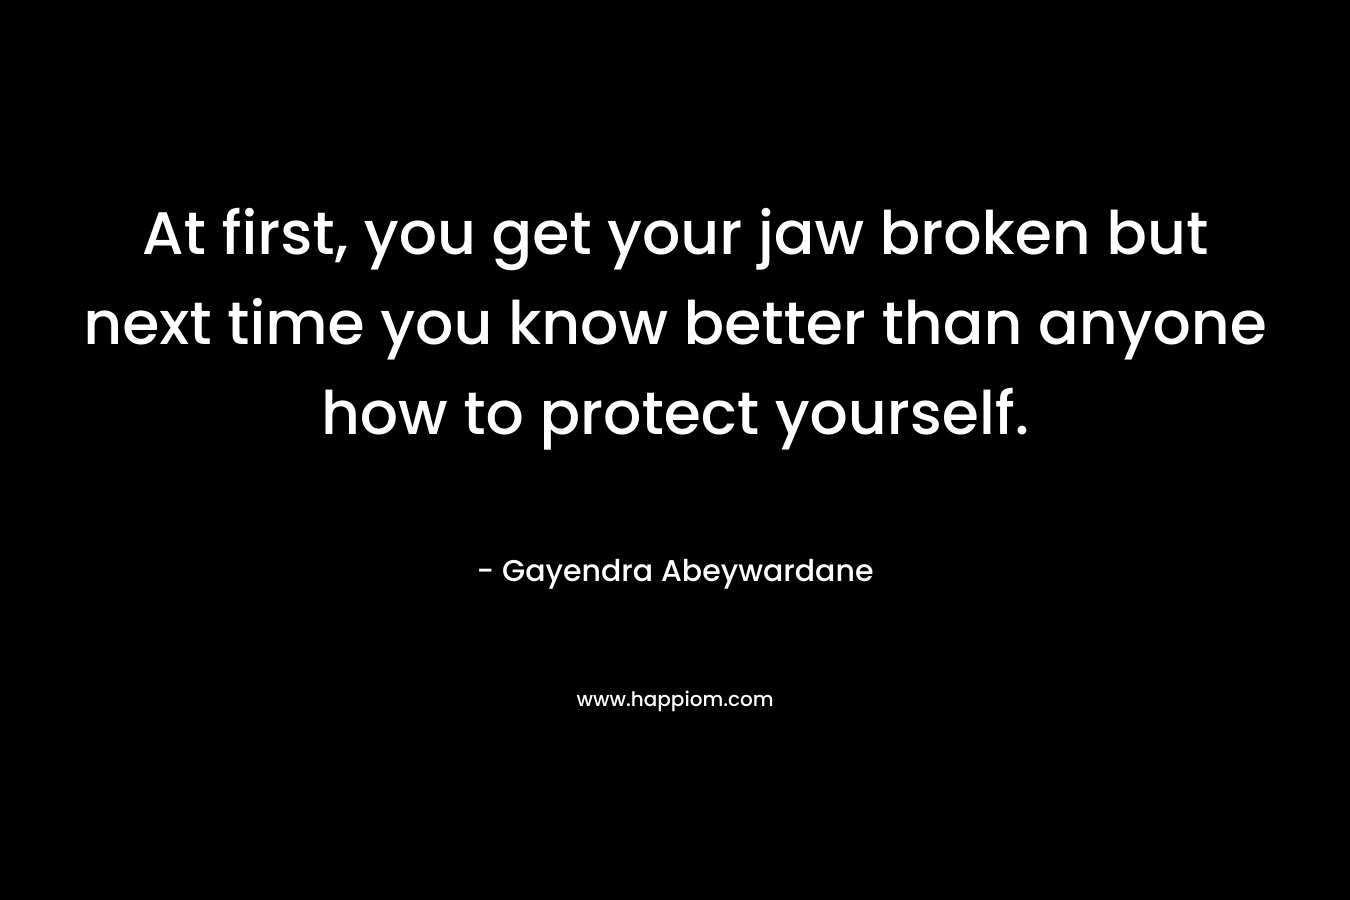 At first, you get your jaw broken but next time you know better than anyone how to protect yourself. – Gayendra Abeywardane